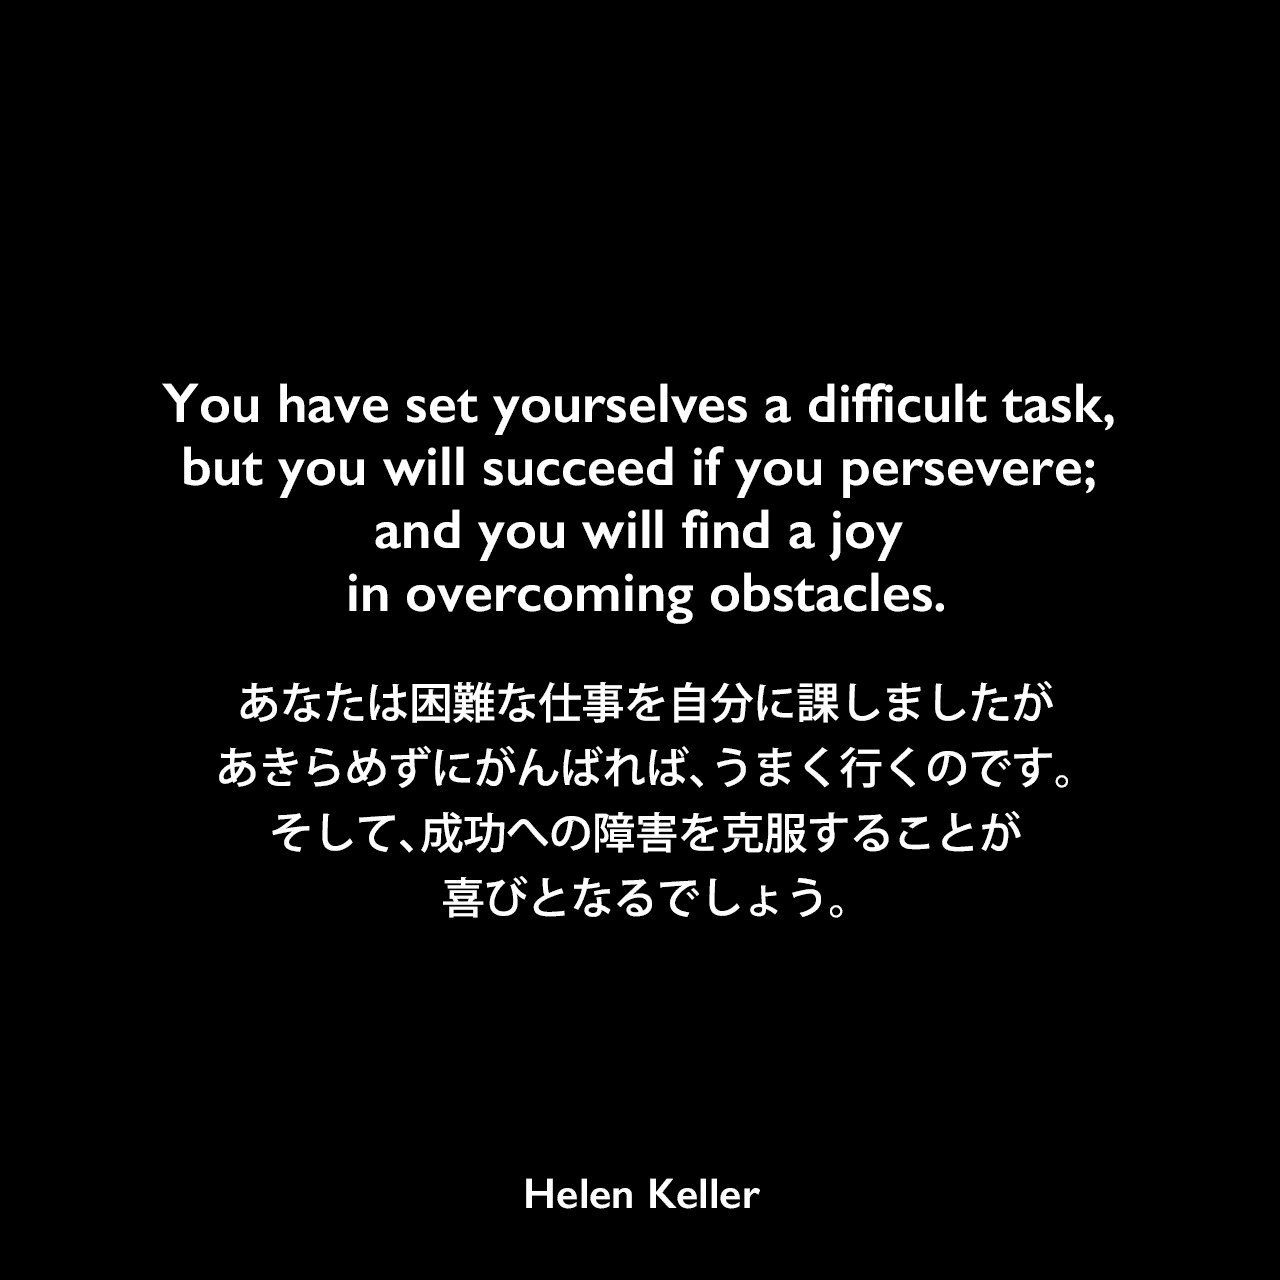 You have set yourselves a difficult task, but you will succeed if you persevere; and you will find a joy in overcoming obstacles.あなたは困難な仕事を自分に課しましたが、あきらめずにがんばれば、うまく行くのです。そして、成功への障害を克服することが喜びとなるでしょう。- 聴覚障害者へのスピーチの指導を促進するための言葉1896年